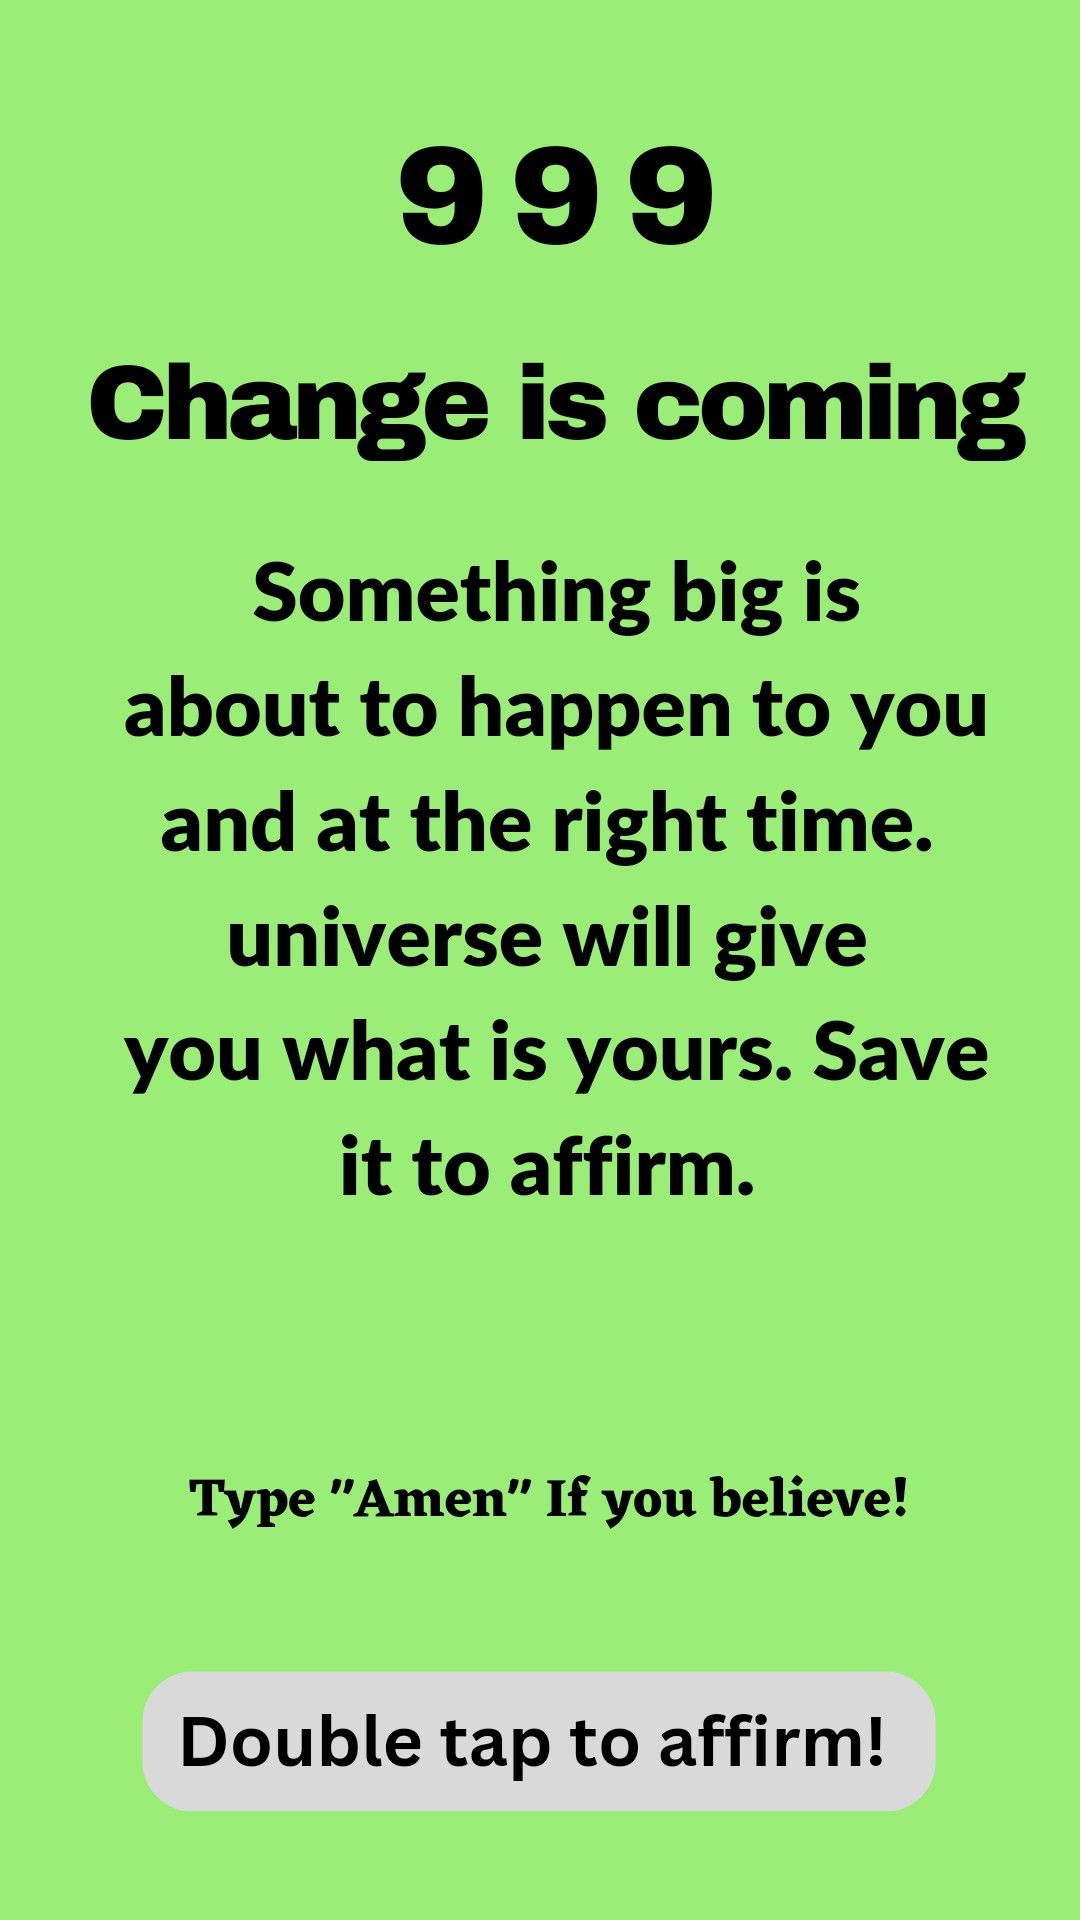 Something big is about to happen to you at the right time.